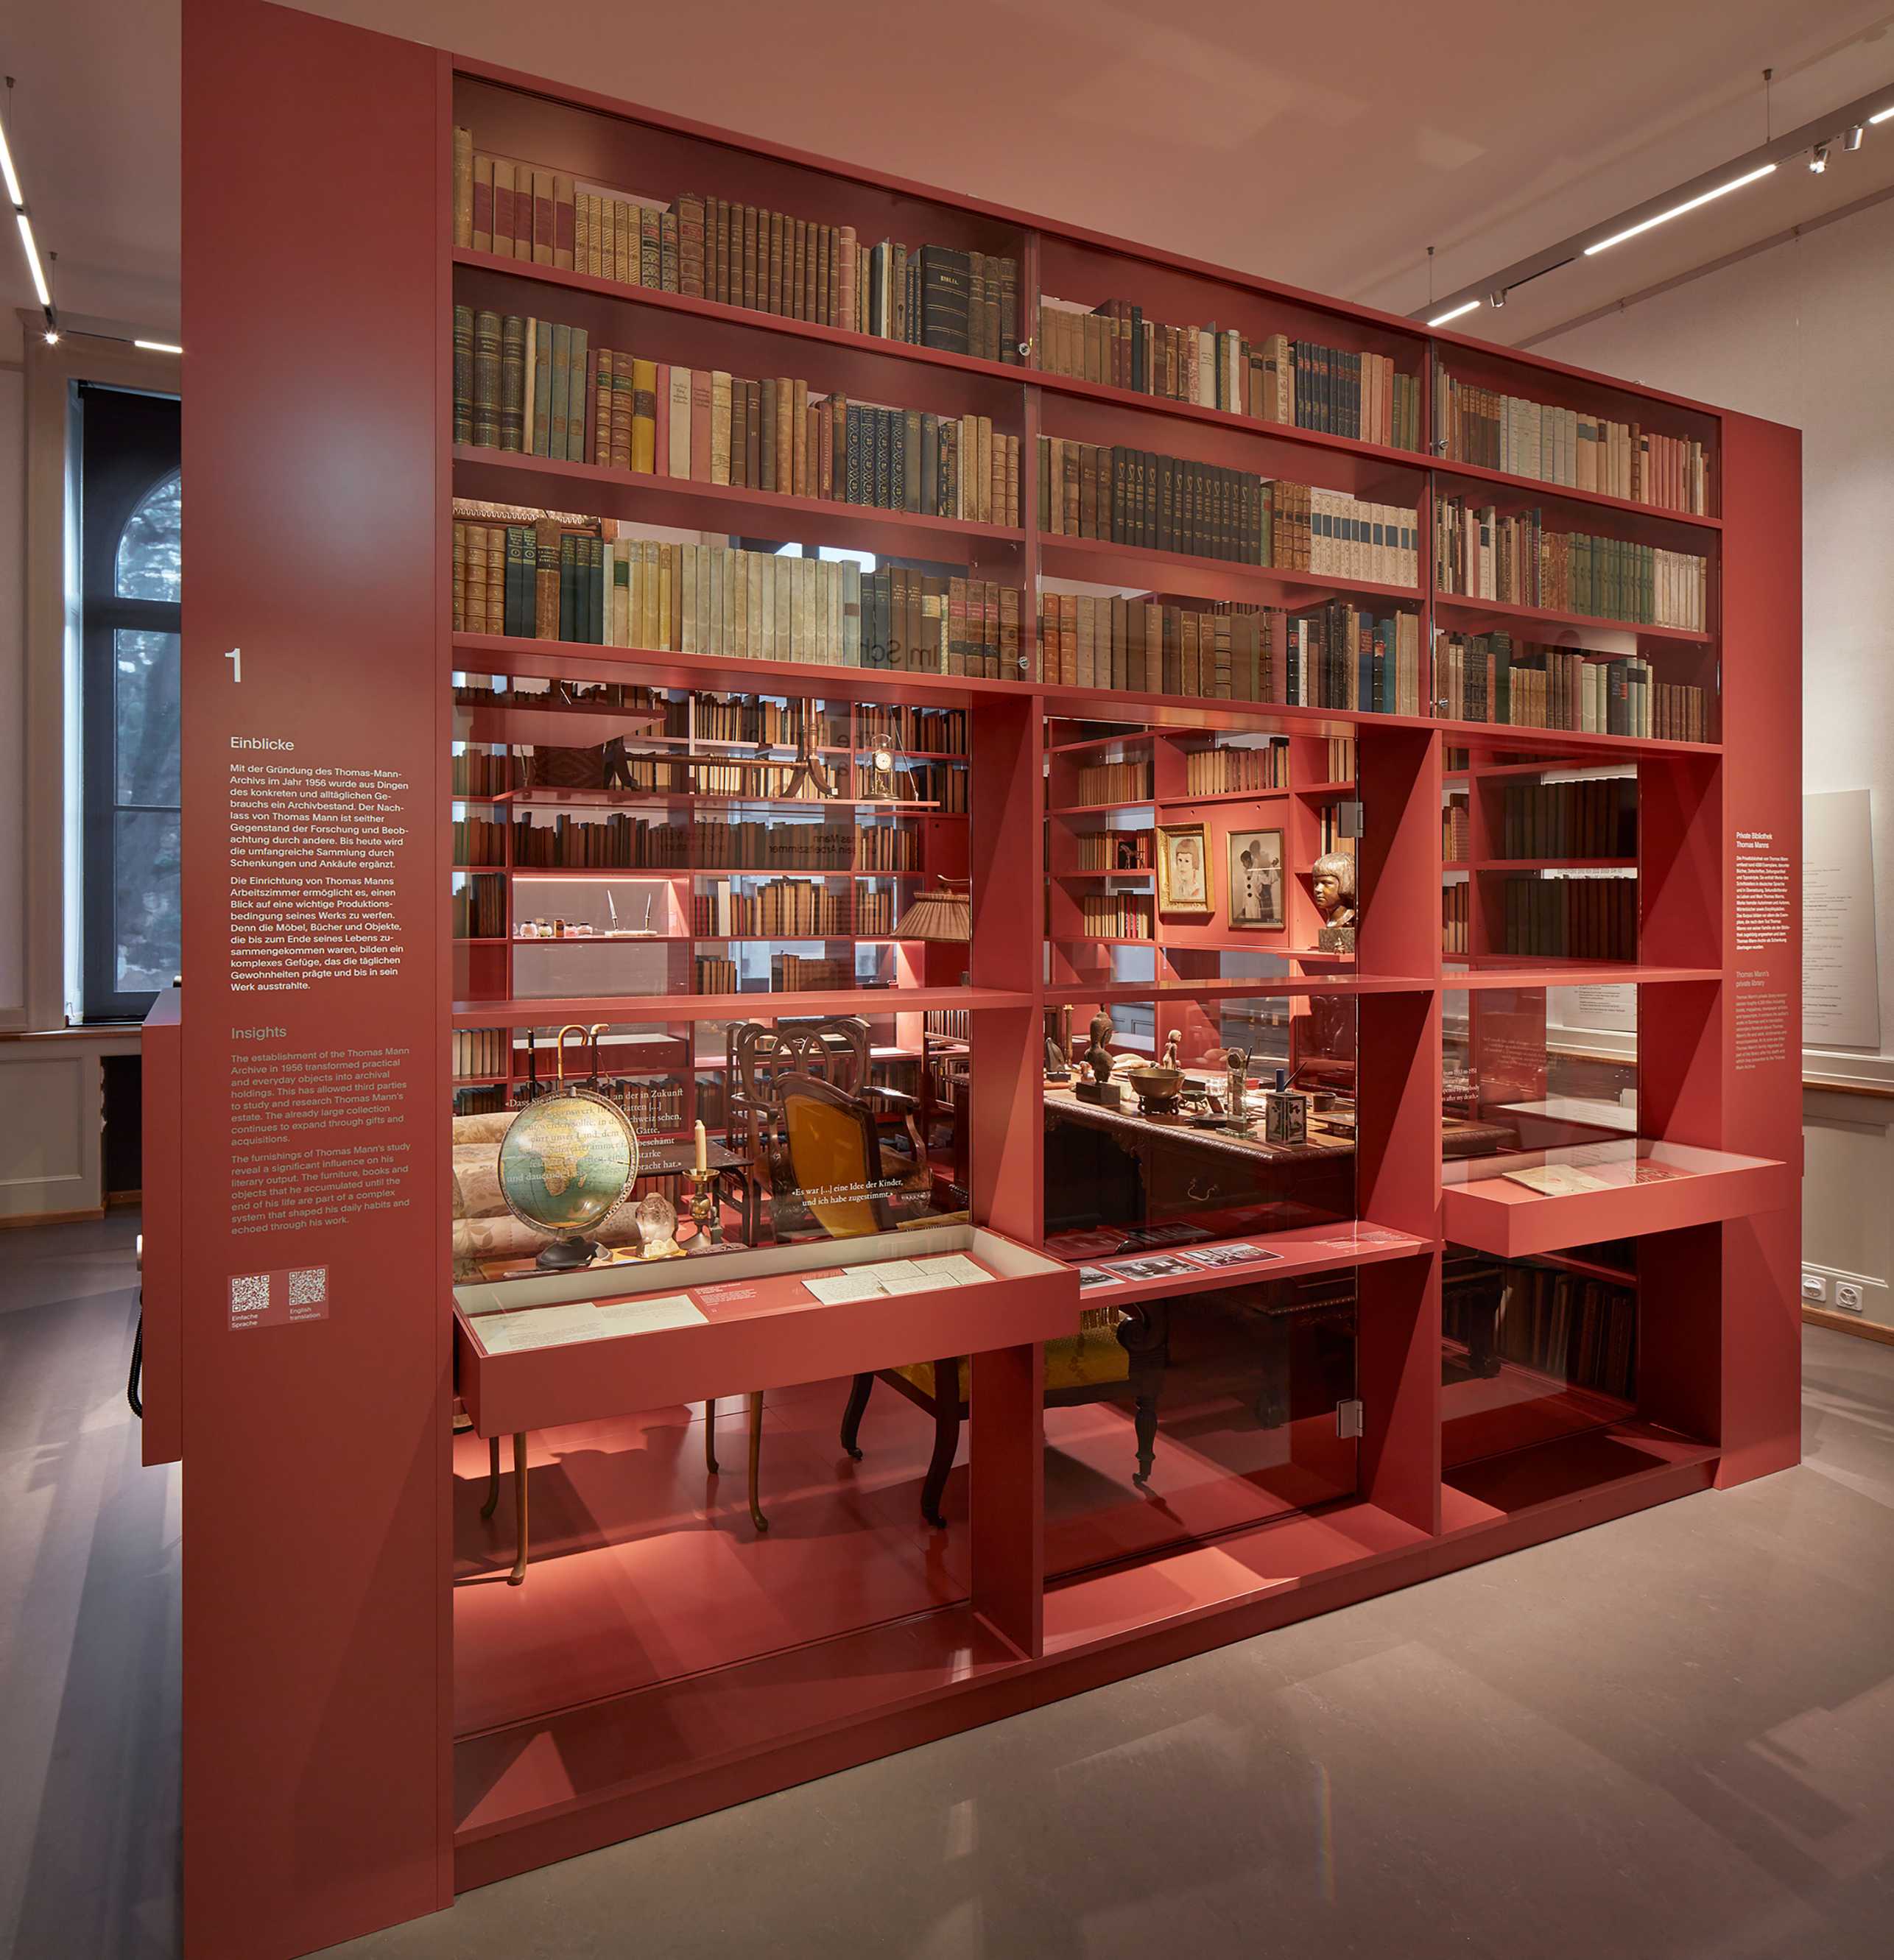 Red shelf with books from the exhibition in the ETH main building